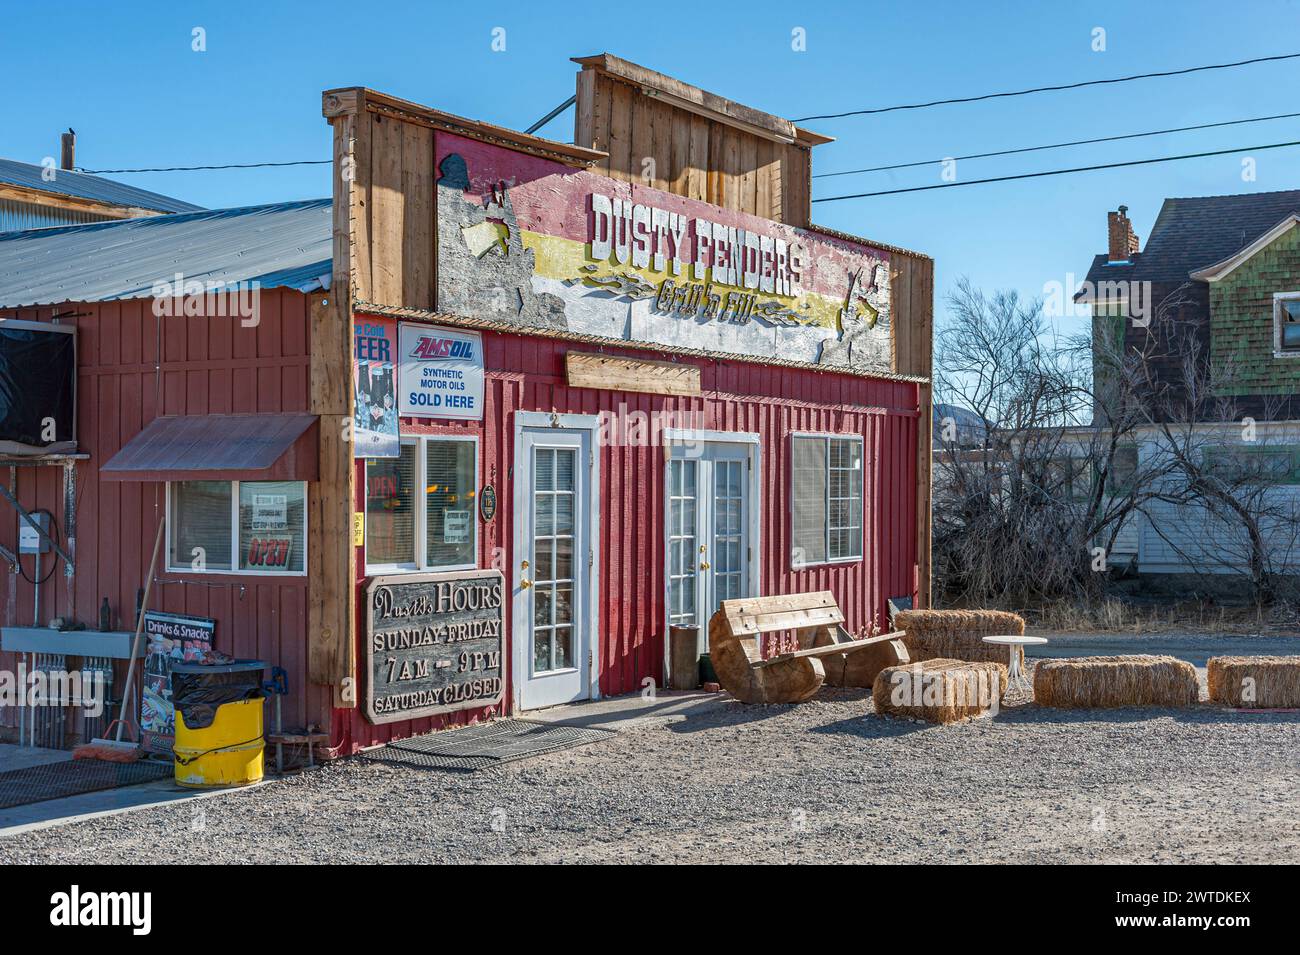 Old West Store - Dusty Fenders Grill N Fill, Goldfield Nevada, USA Stock Photo